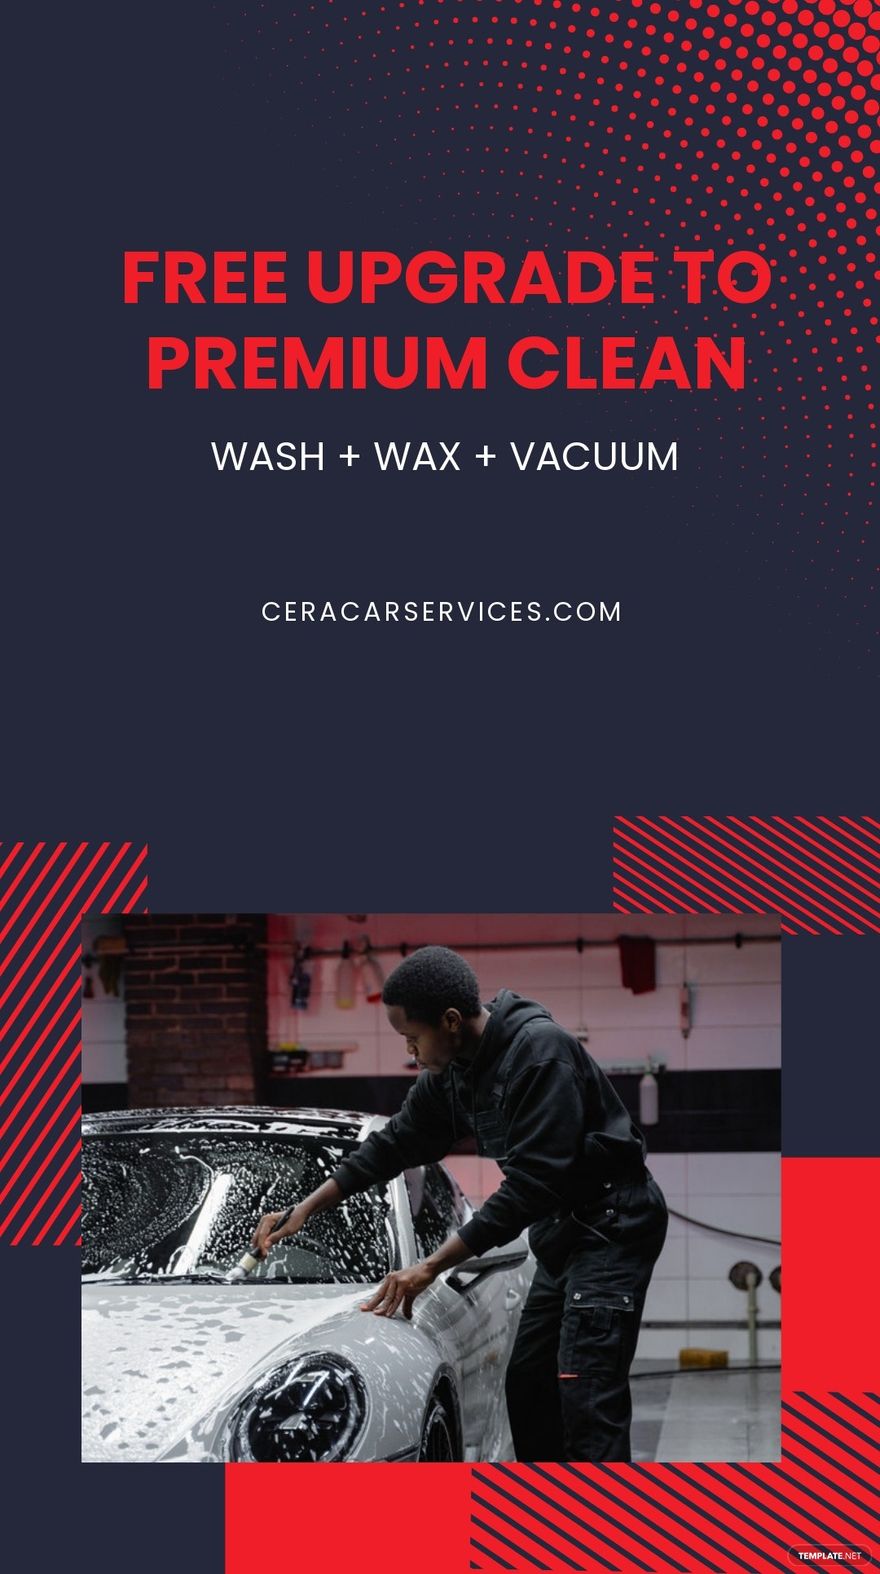 Car Wash Promotion Whatsapp Post Template